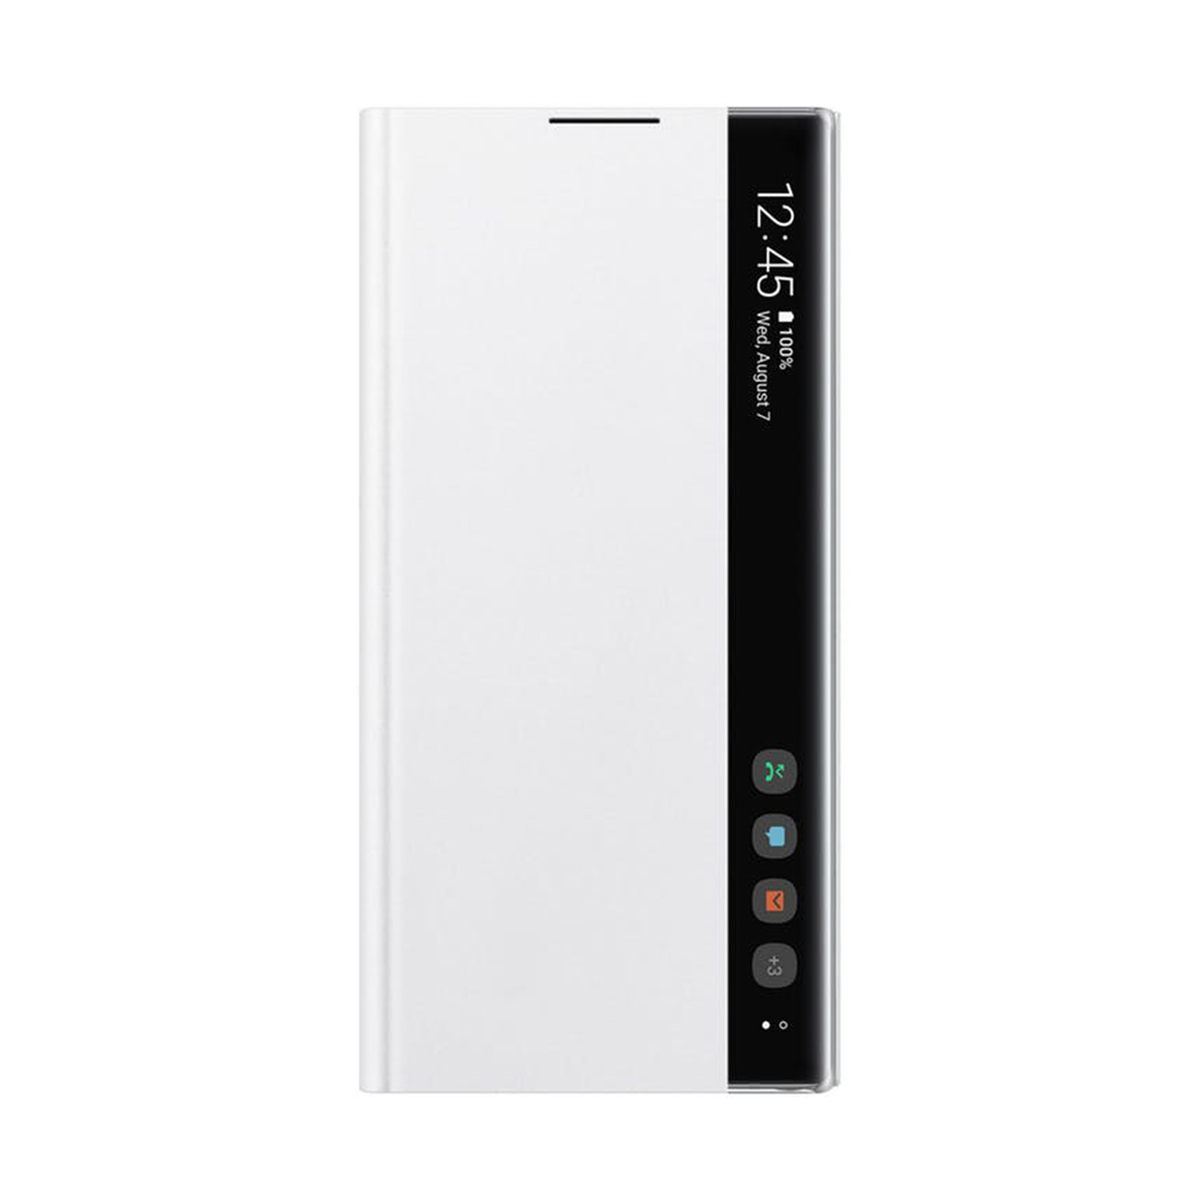 Samsung Galaxy Note10+ Clear View Cover ZN975 White